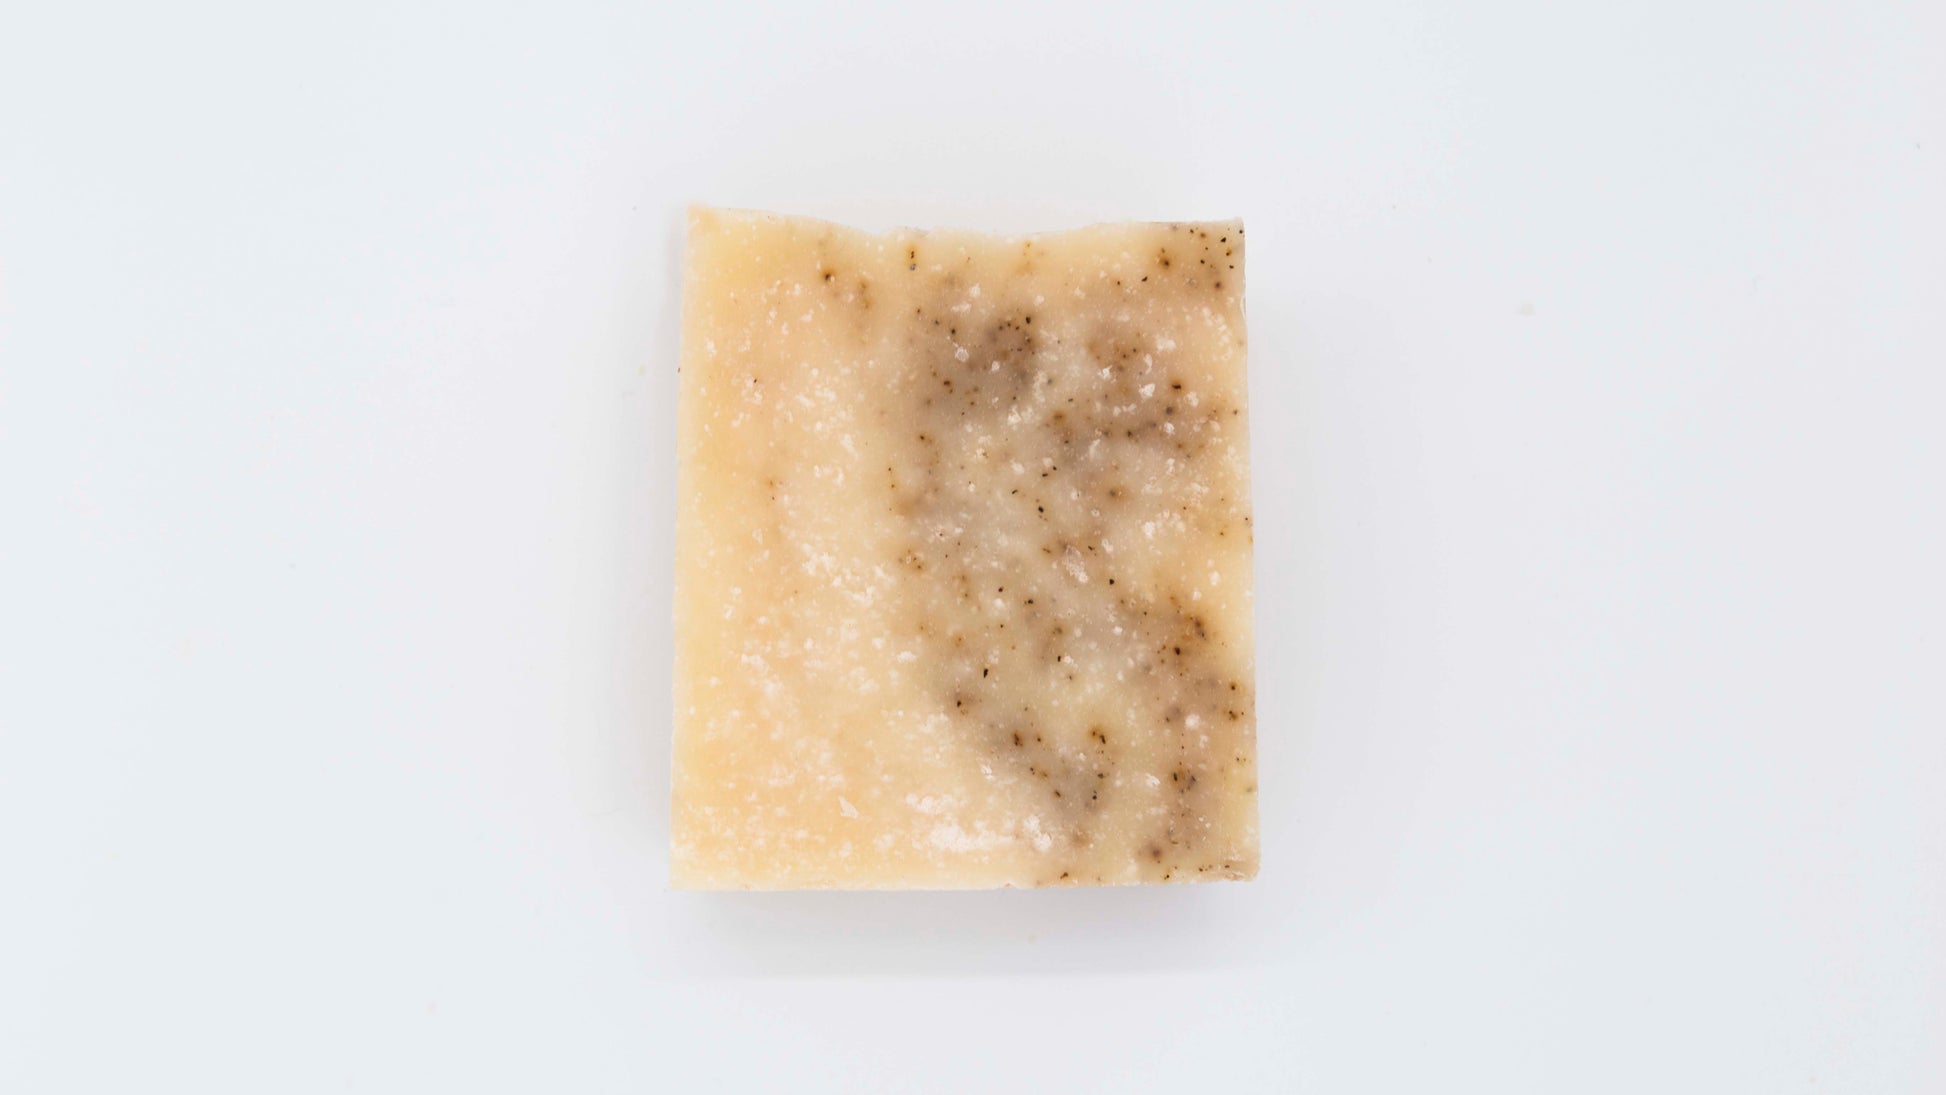 Ivory colored grapefruit black pepper soap bar with tiny specks of a black pepper swirl sits on a clean white background.